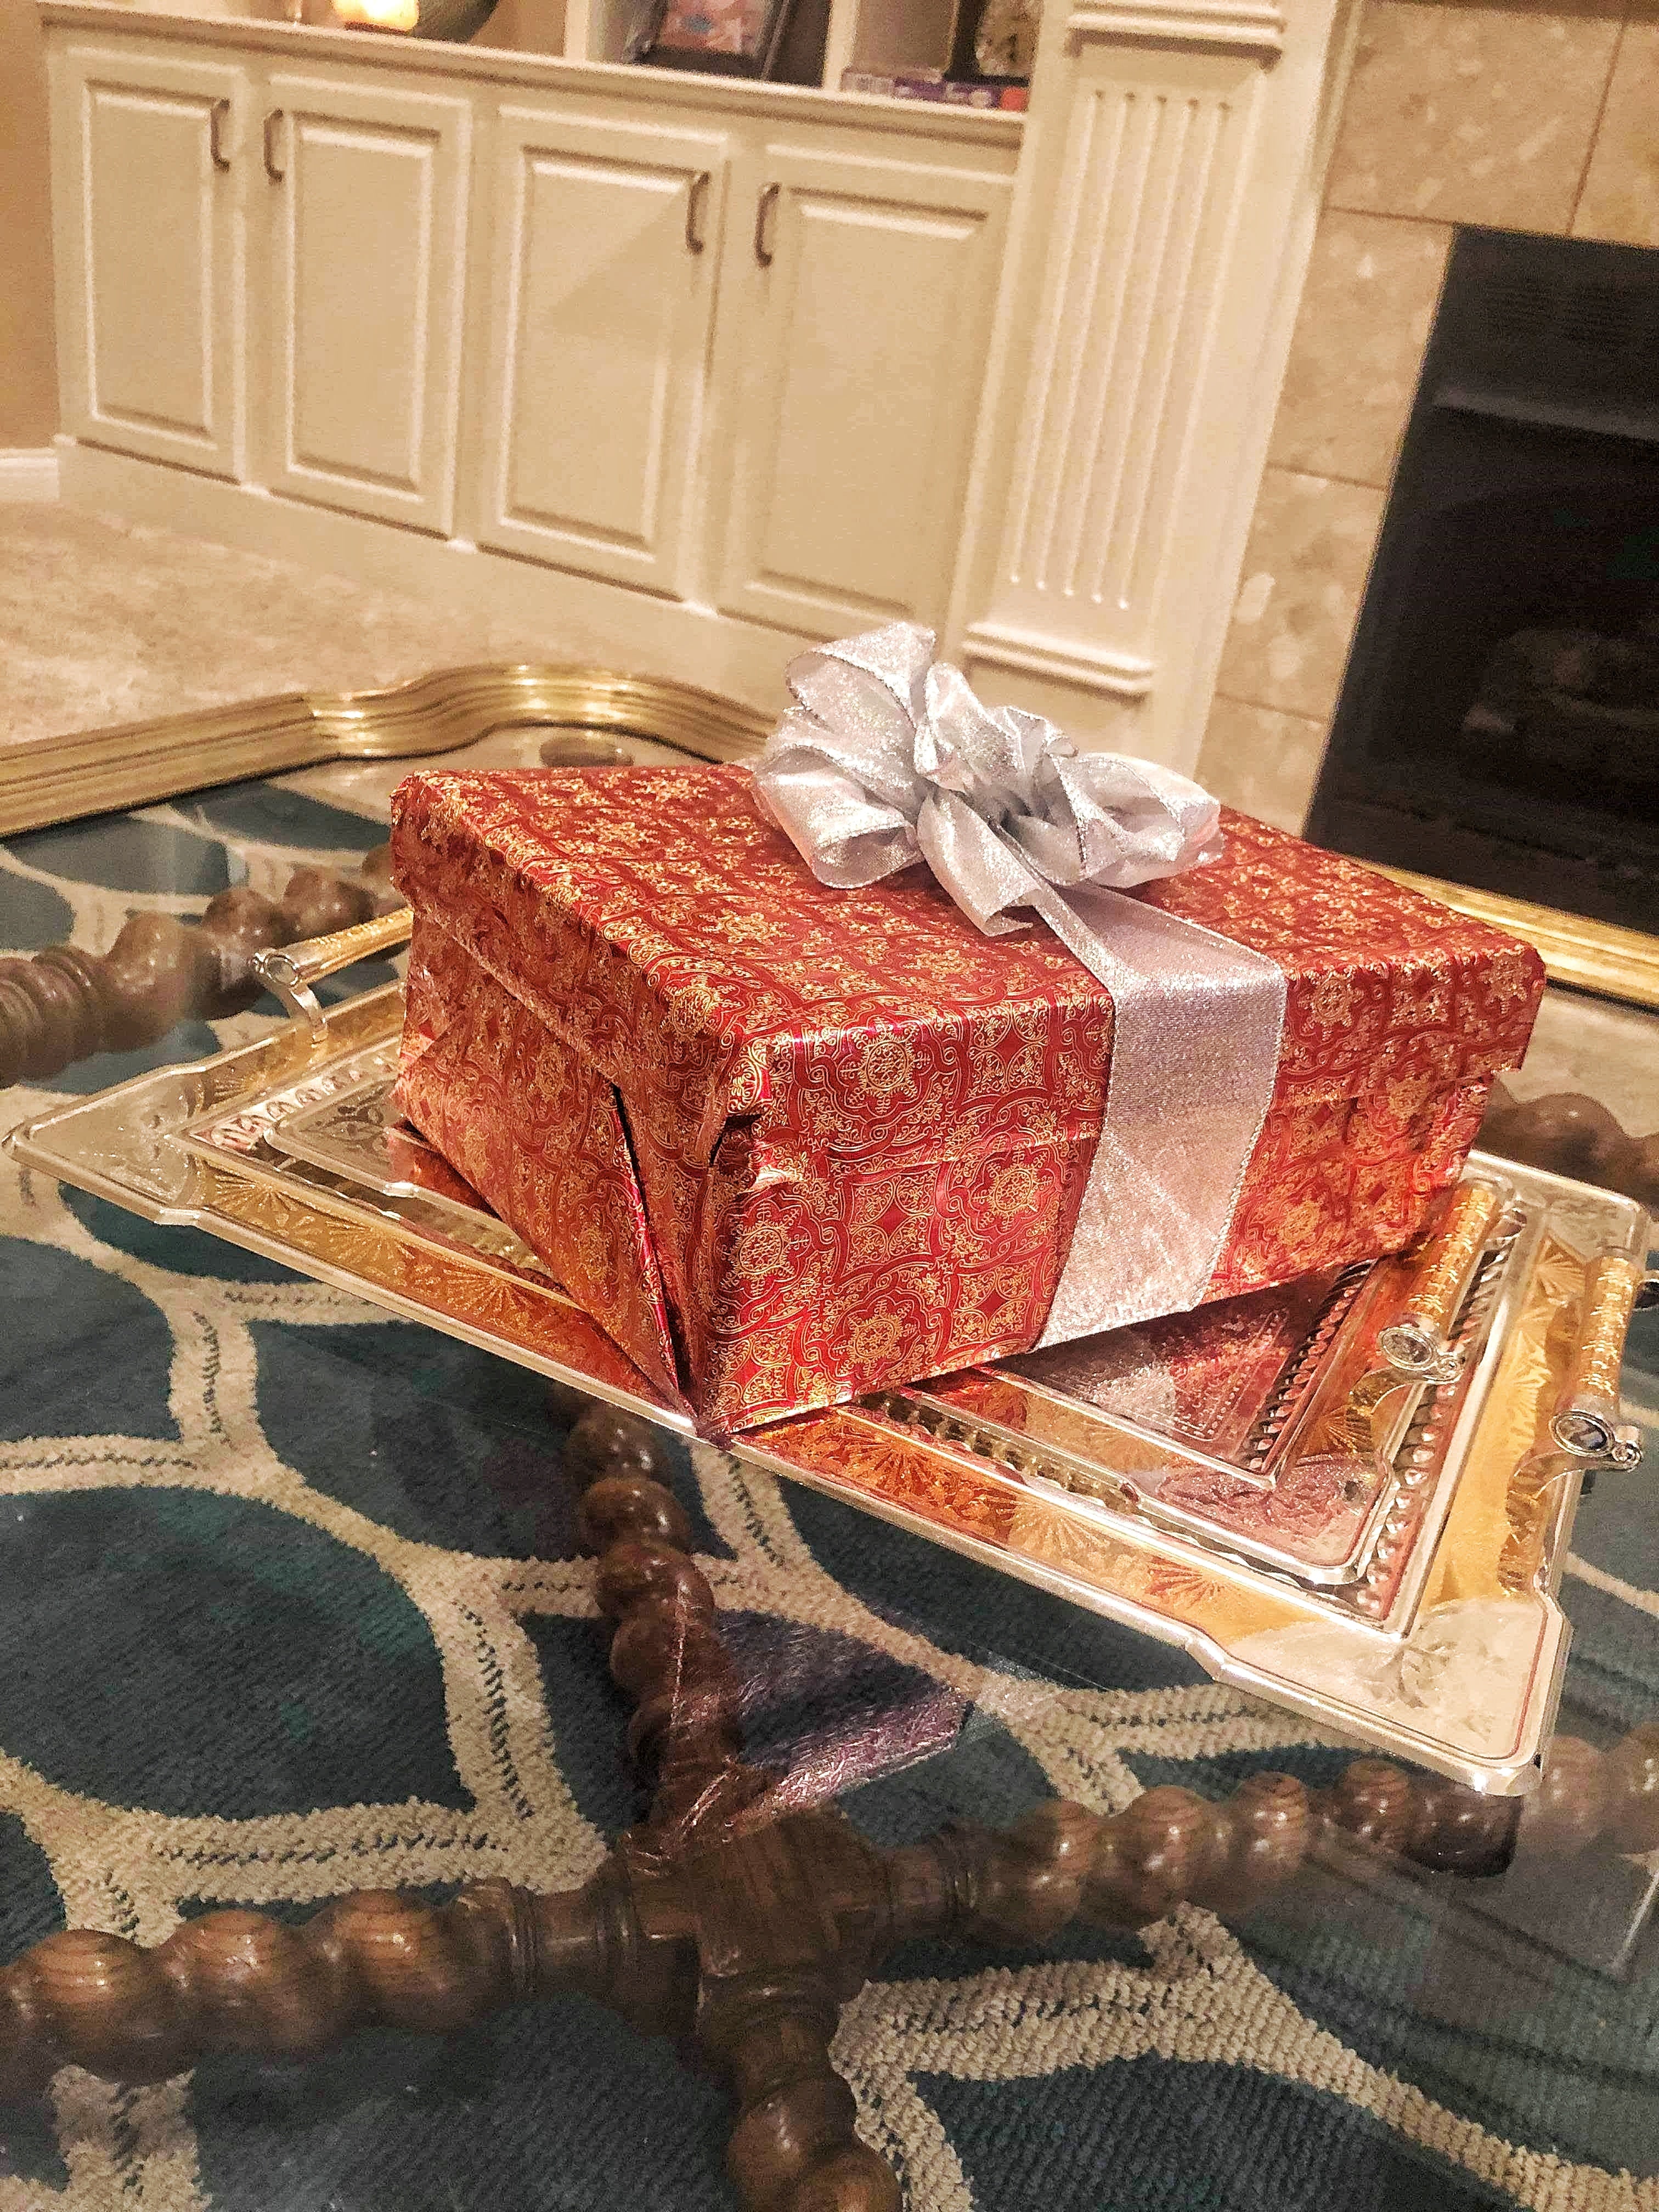 Carina's wrapped gift